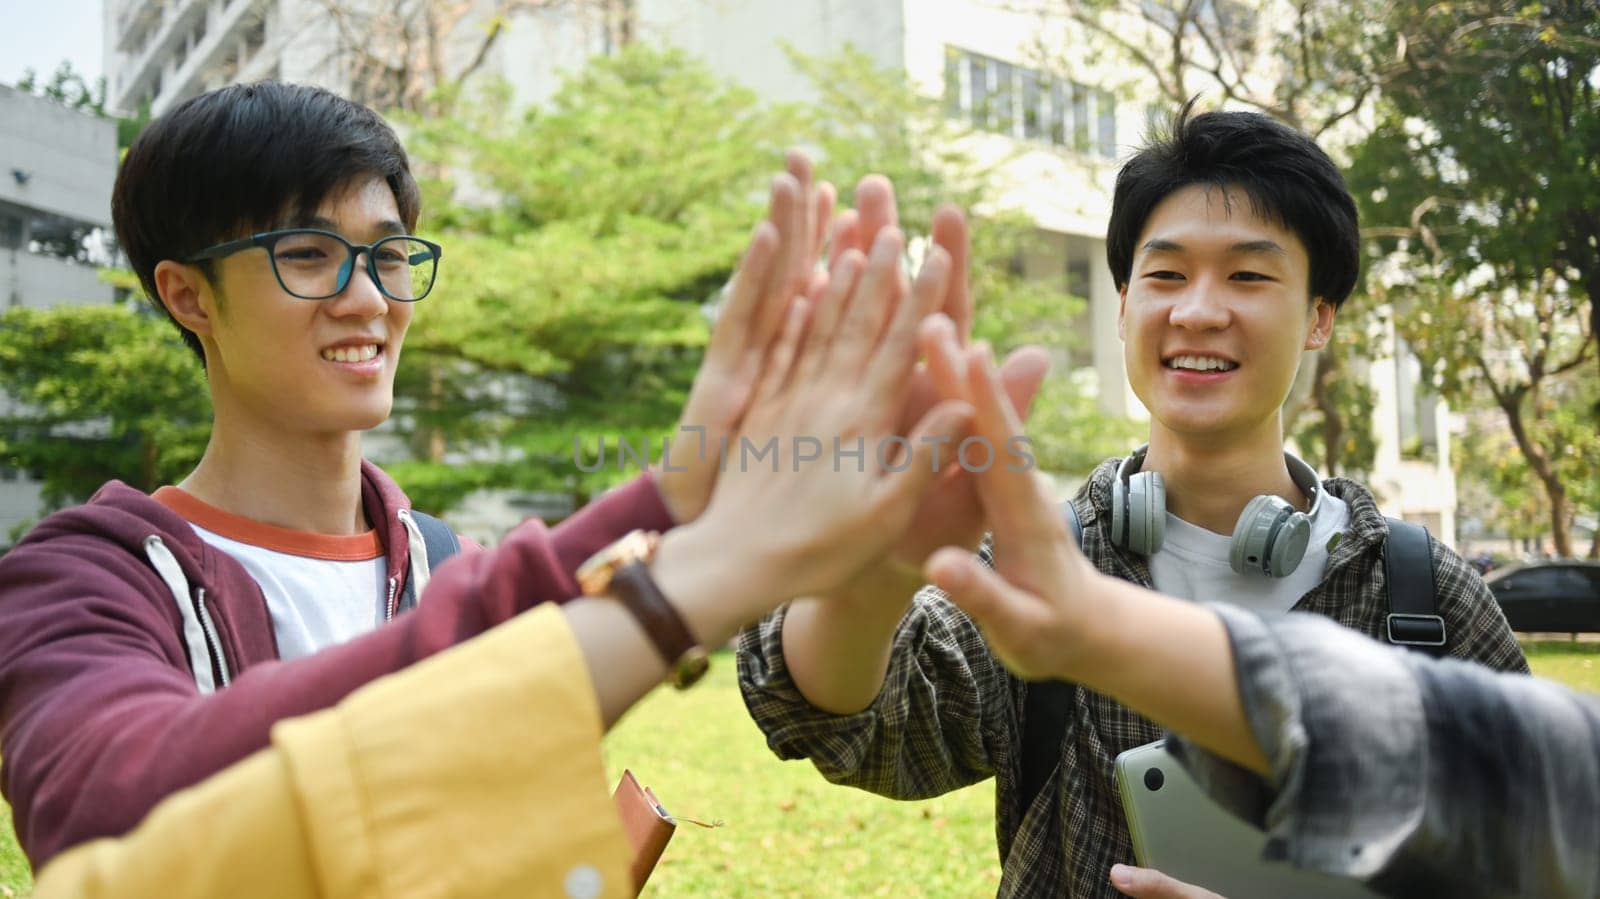 Group of university friends giving high five, celebrating together. University, youth lifestyle and friendship concept.